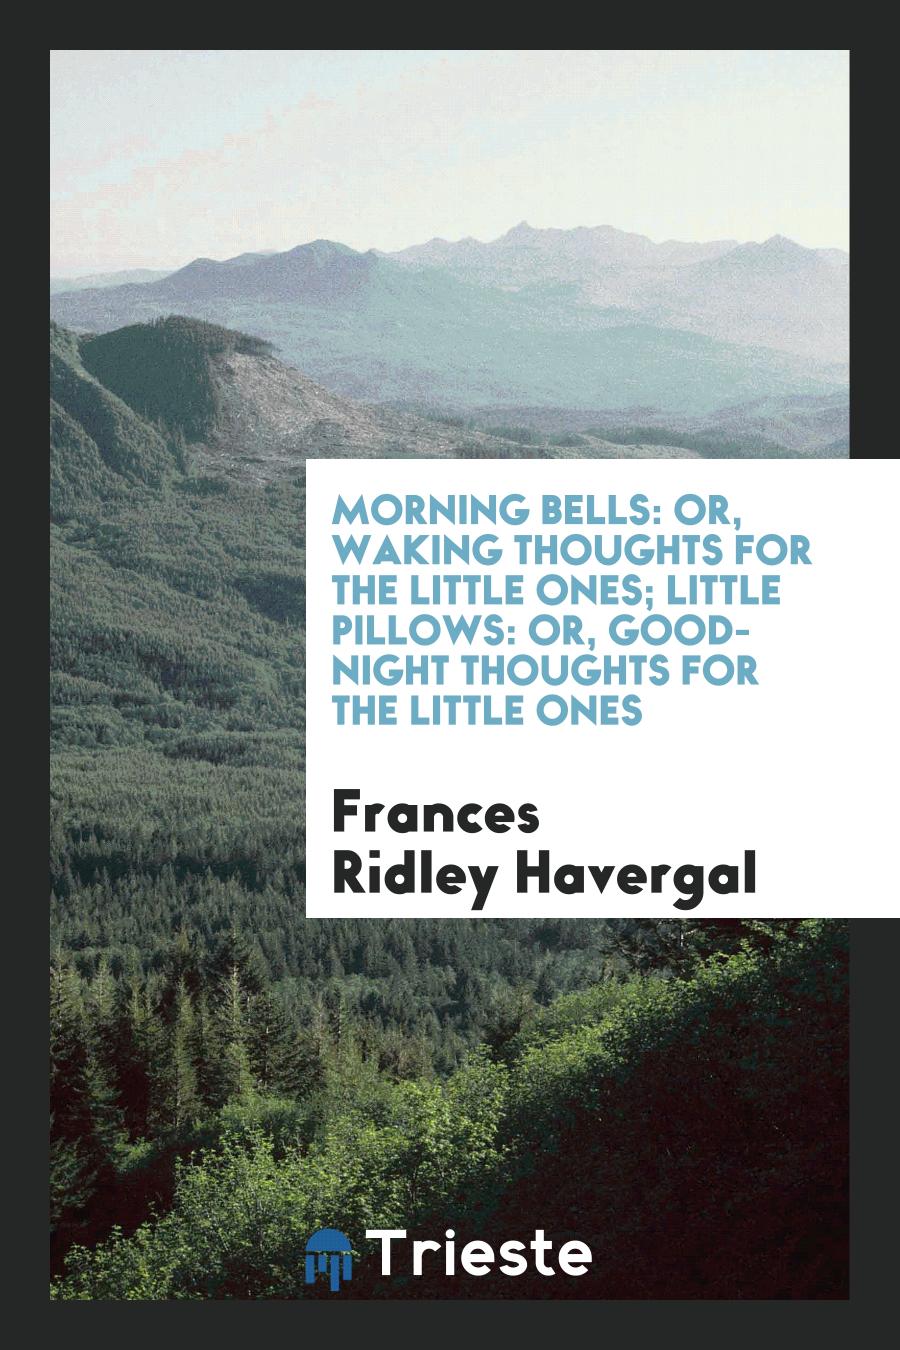 Morning Bells: Or, Waking Thoughts for the Little Ones; Little Pillows: Or, Good-Night Thoughts for the Little Ones